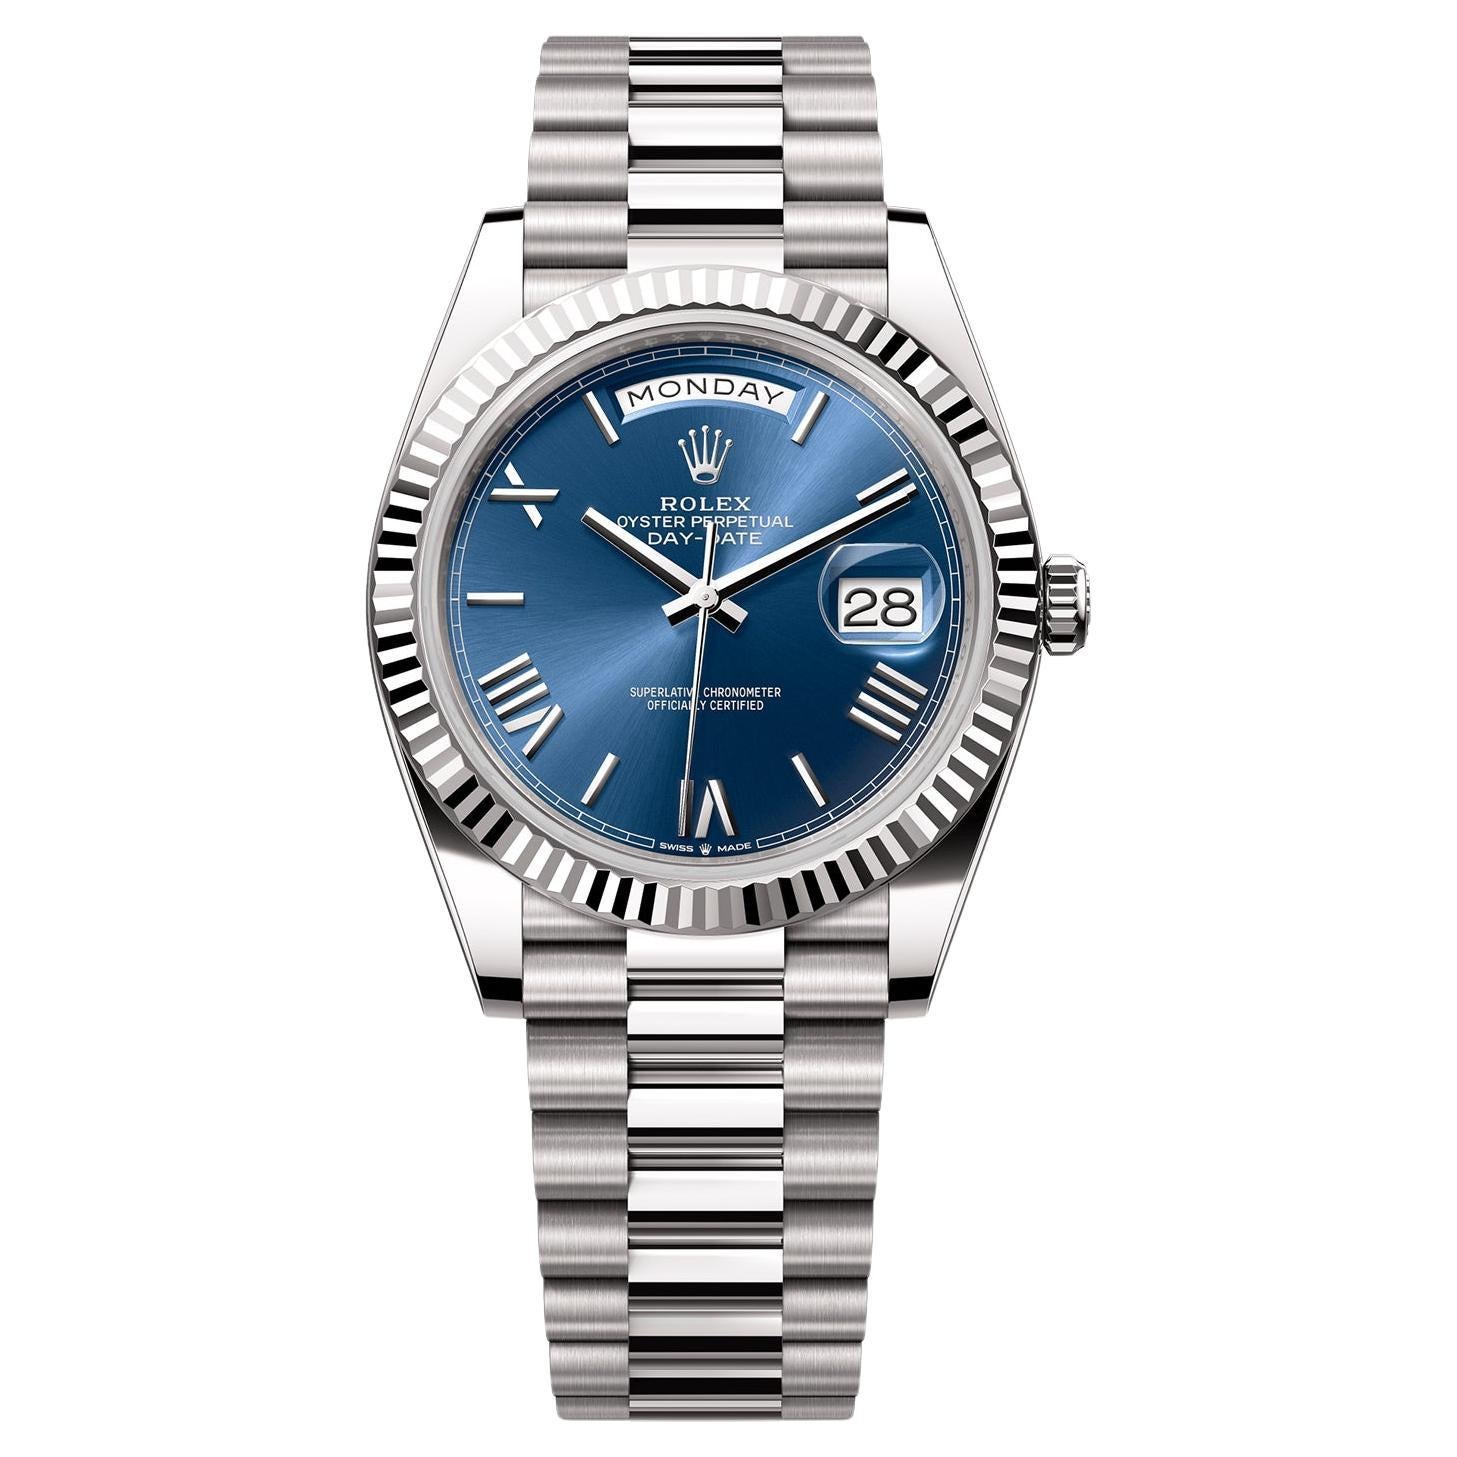 Rolex Day-Date 40mm White Gold Bright Blue Roman Dial Fluted Bezel Watch 228239